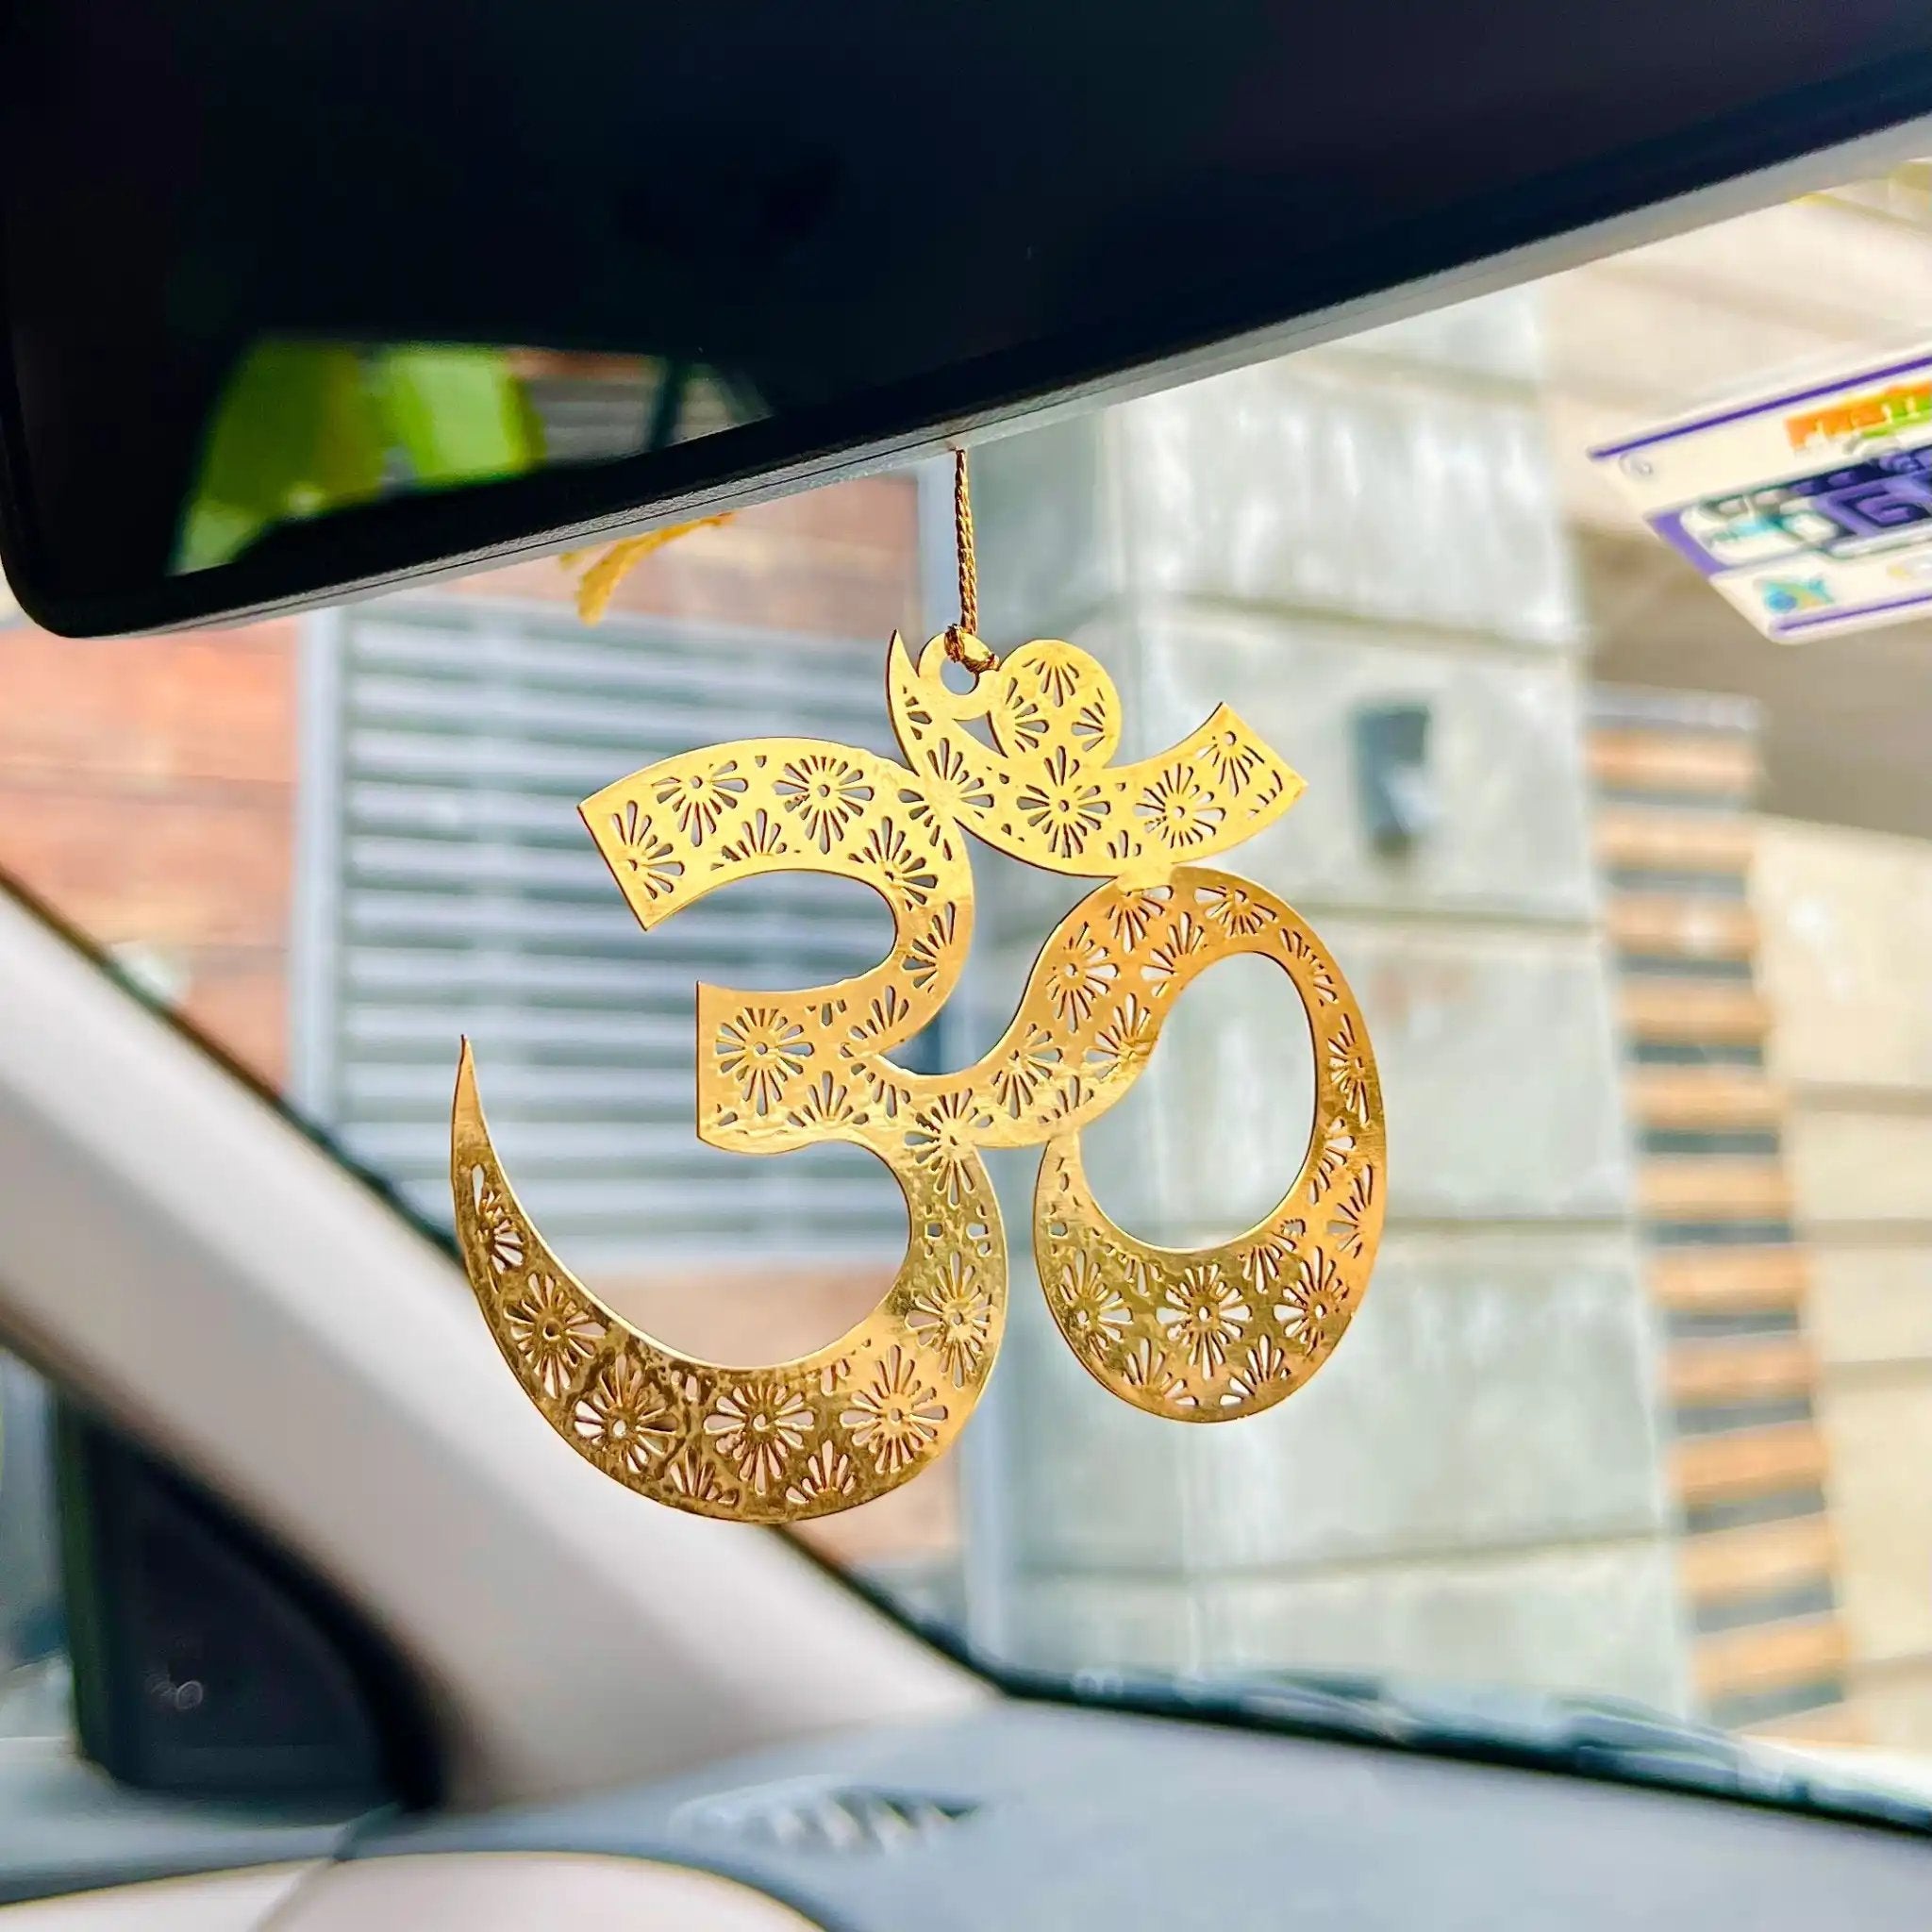 OM Harmony A beautifully crafted accessory, perfect for adding blessings and grace to your car's dashboard, serving as a decorative centerpiece on your table Hindustanwale OM Harmony